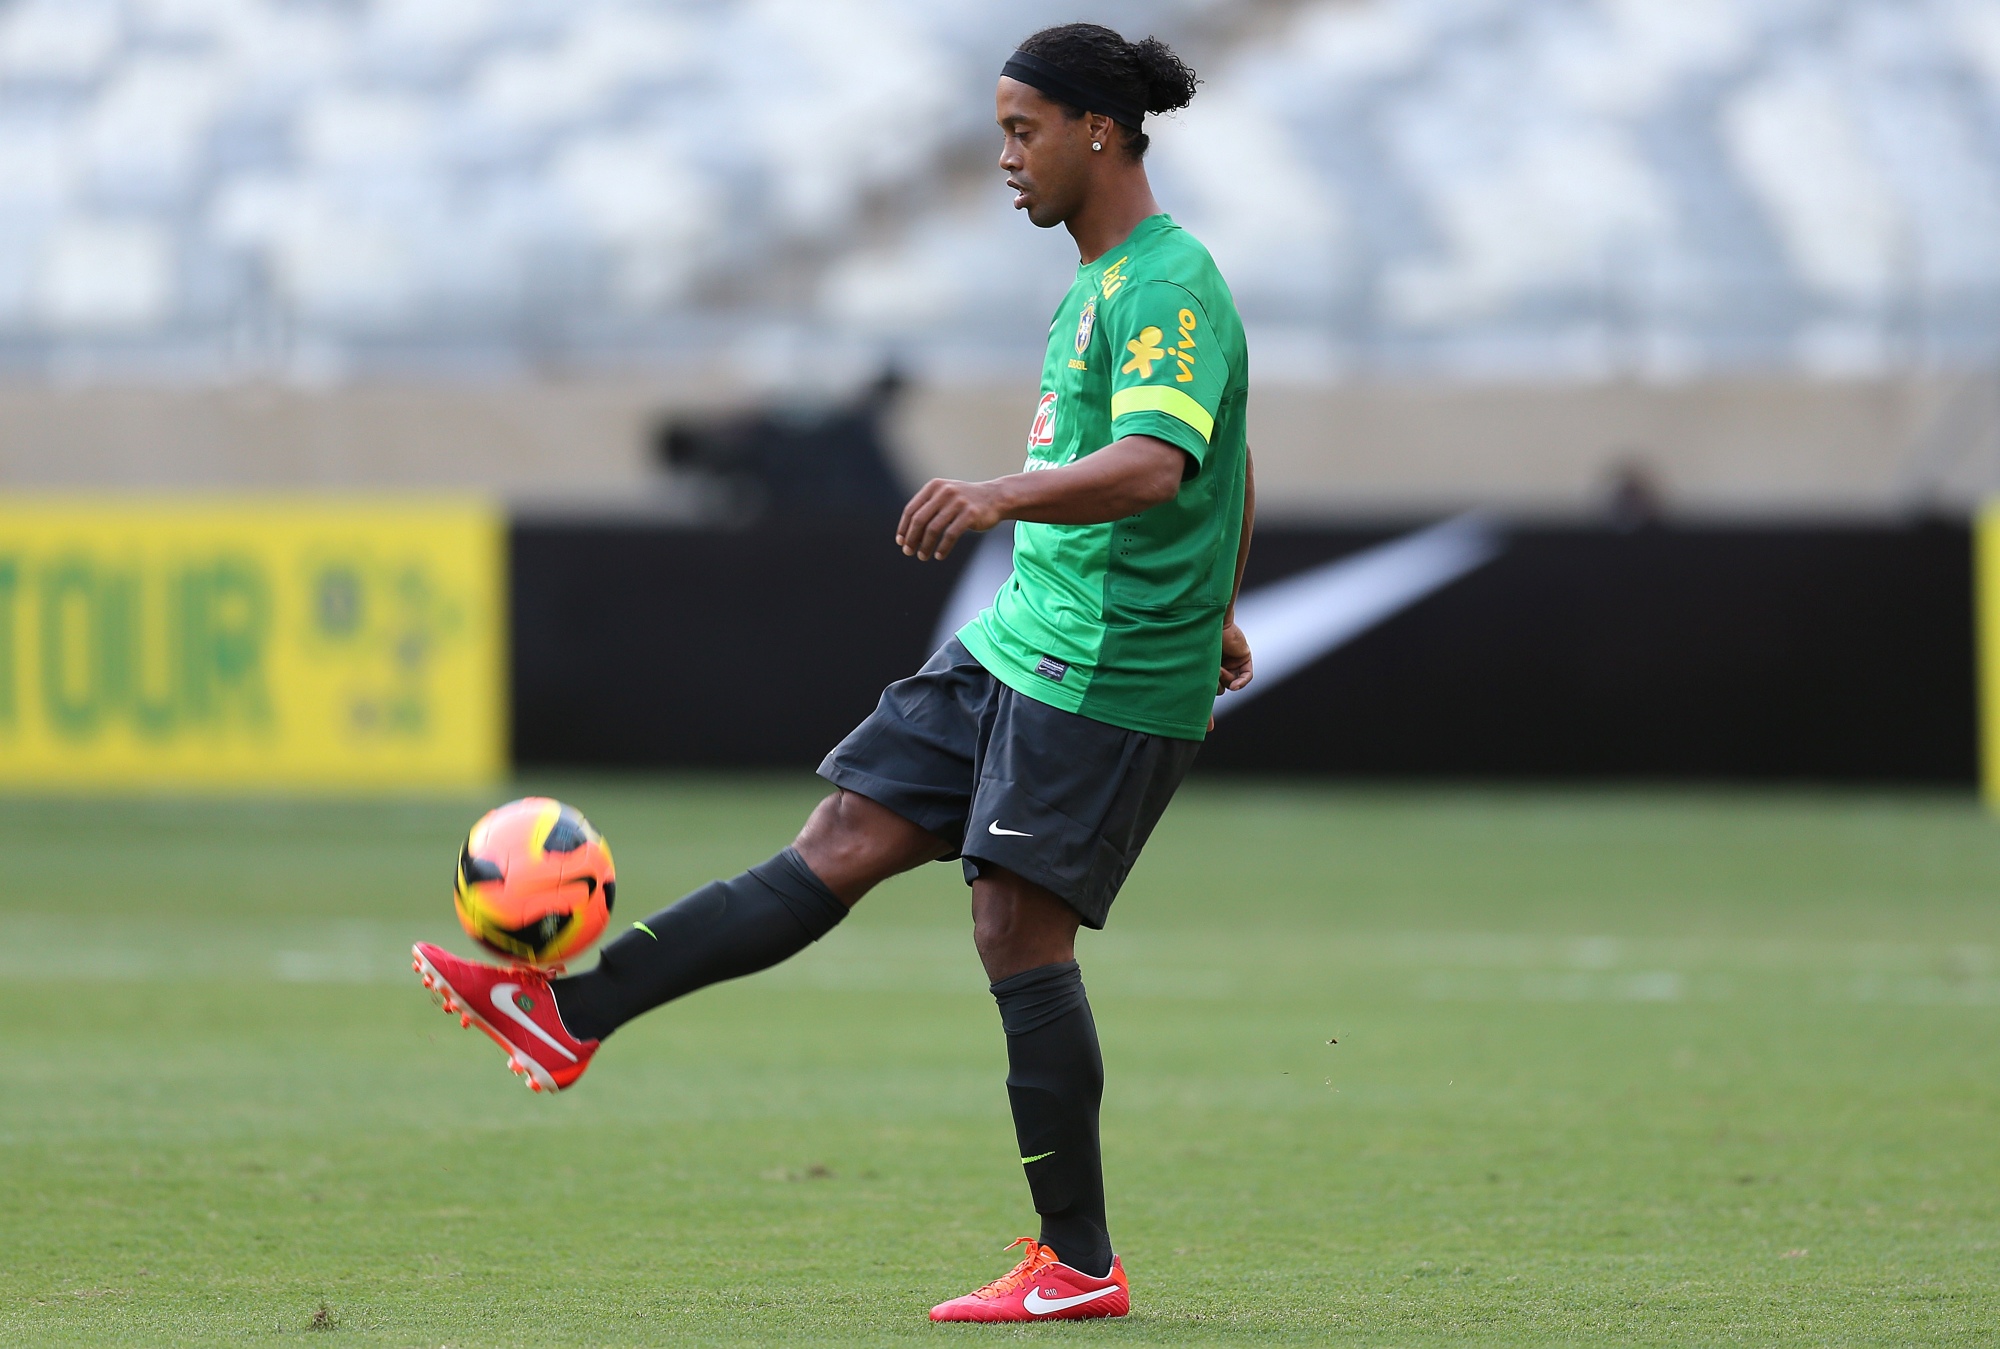 Ronaldinho during a training session in Belo Horizonte, Brazil. He has picked up a thigh injury in training. Photo: AP